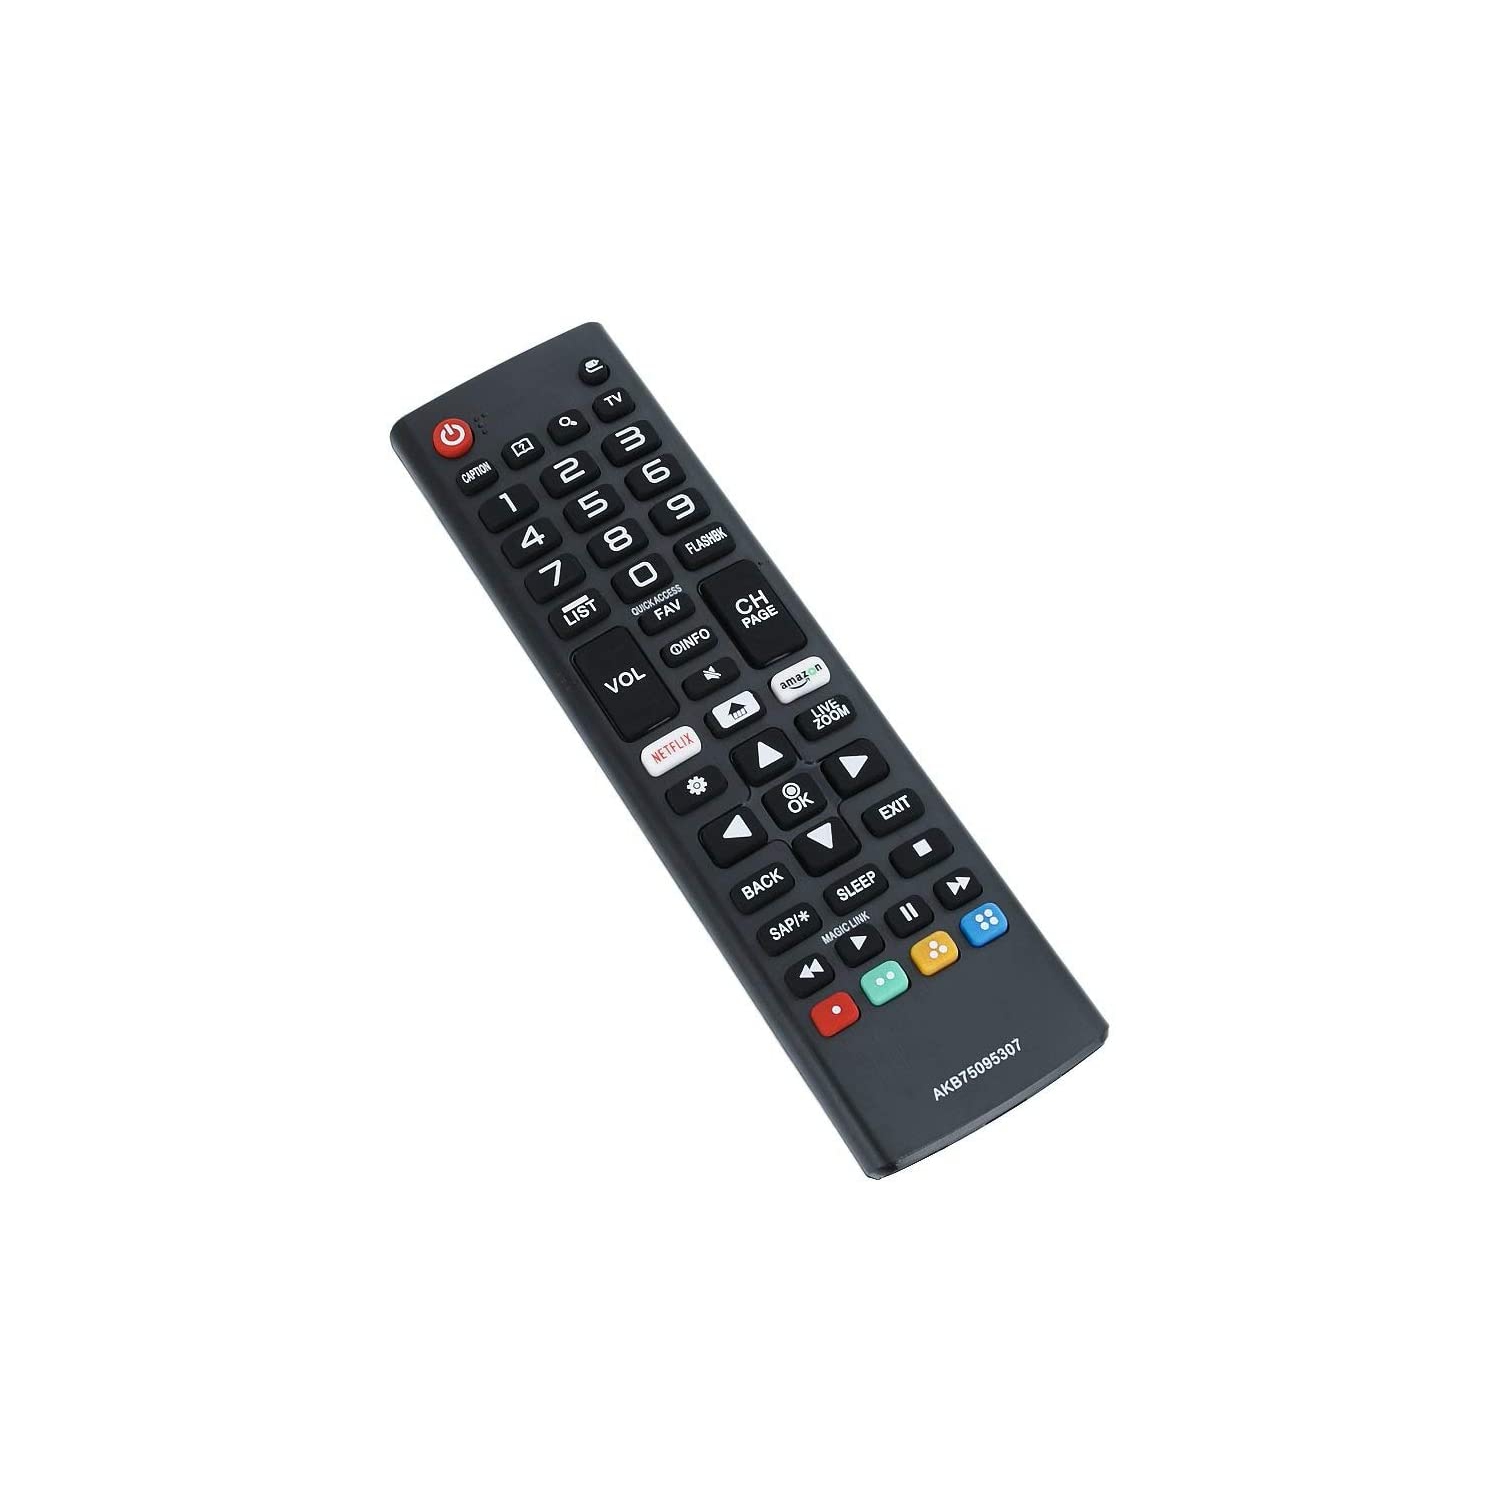 Replacement LG AKB75095307 Remote Control for LG LED LCD 4K UHD Smart TV, No Setup Needed LG TV Remote Fit